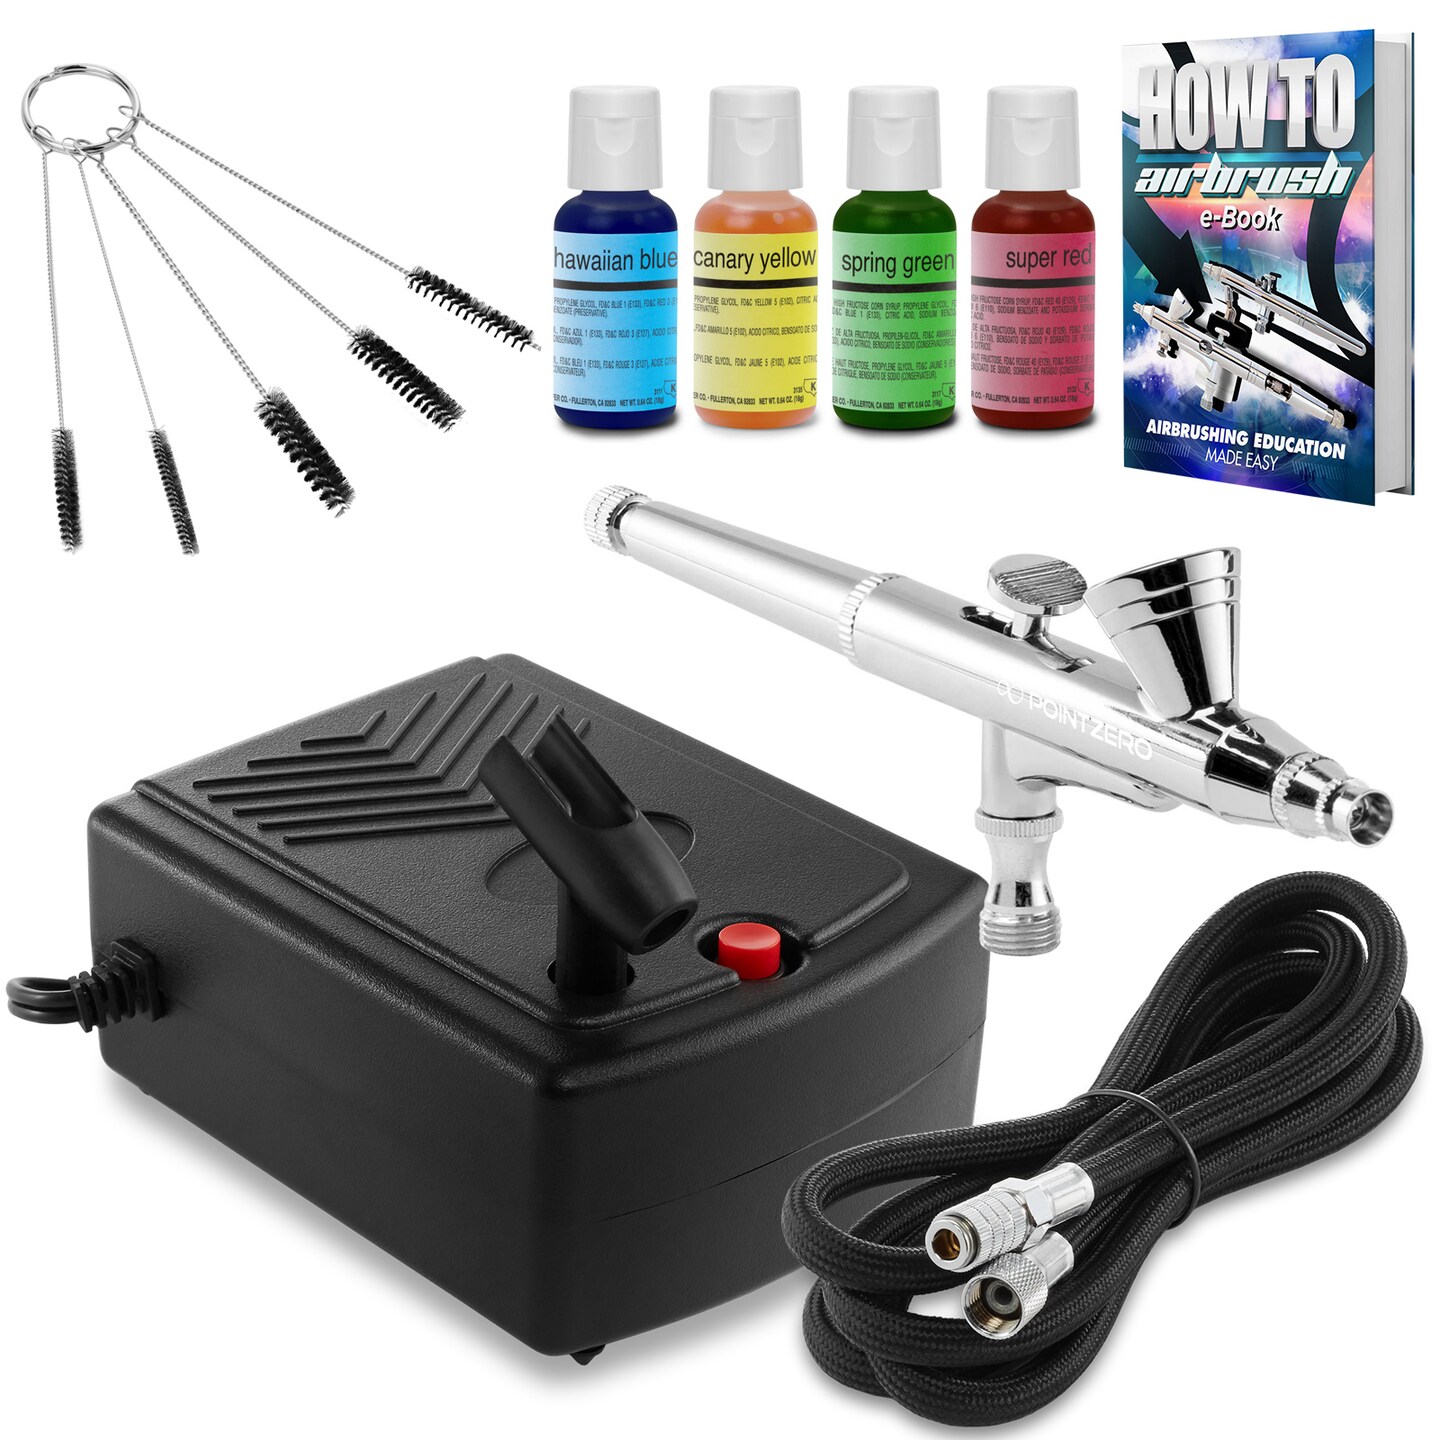 Cake Decorating Airbrushing System Kit with Siphon Feed Airbrush, 12 Food  Colors, Compressor, Bundle - Harris Teeter